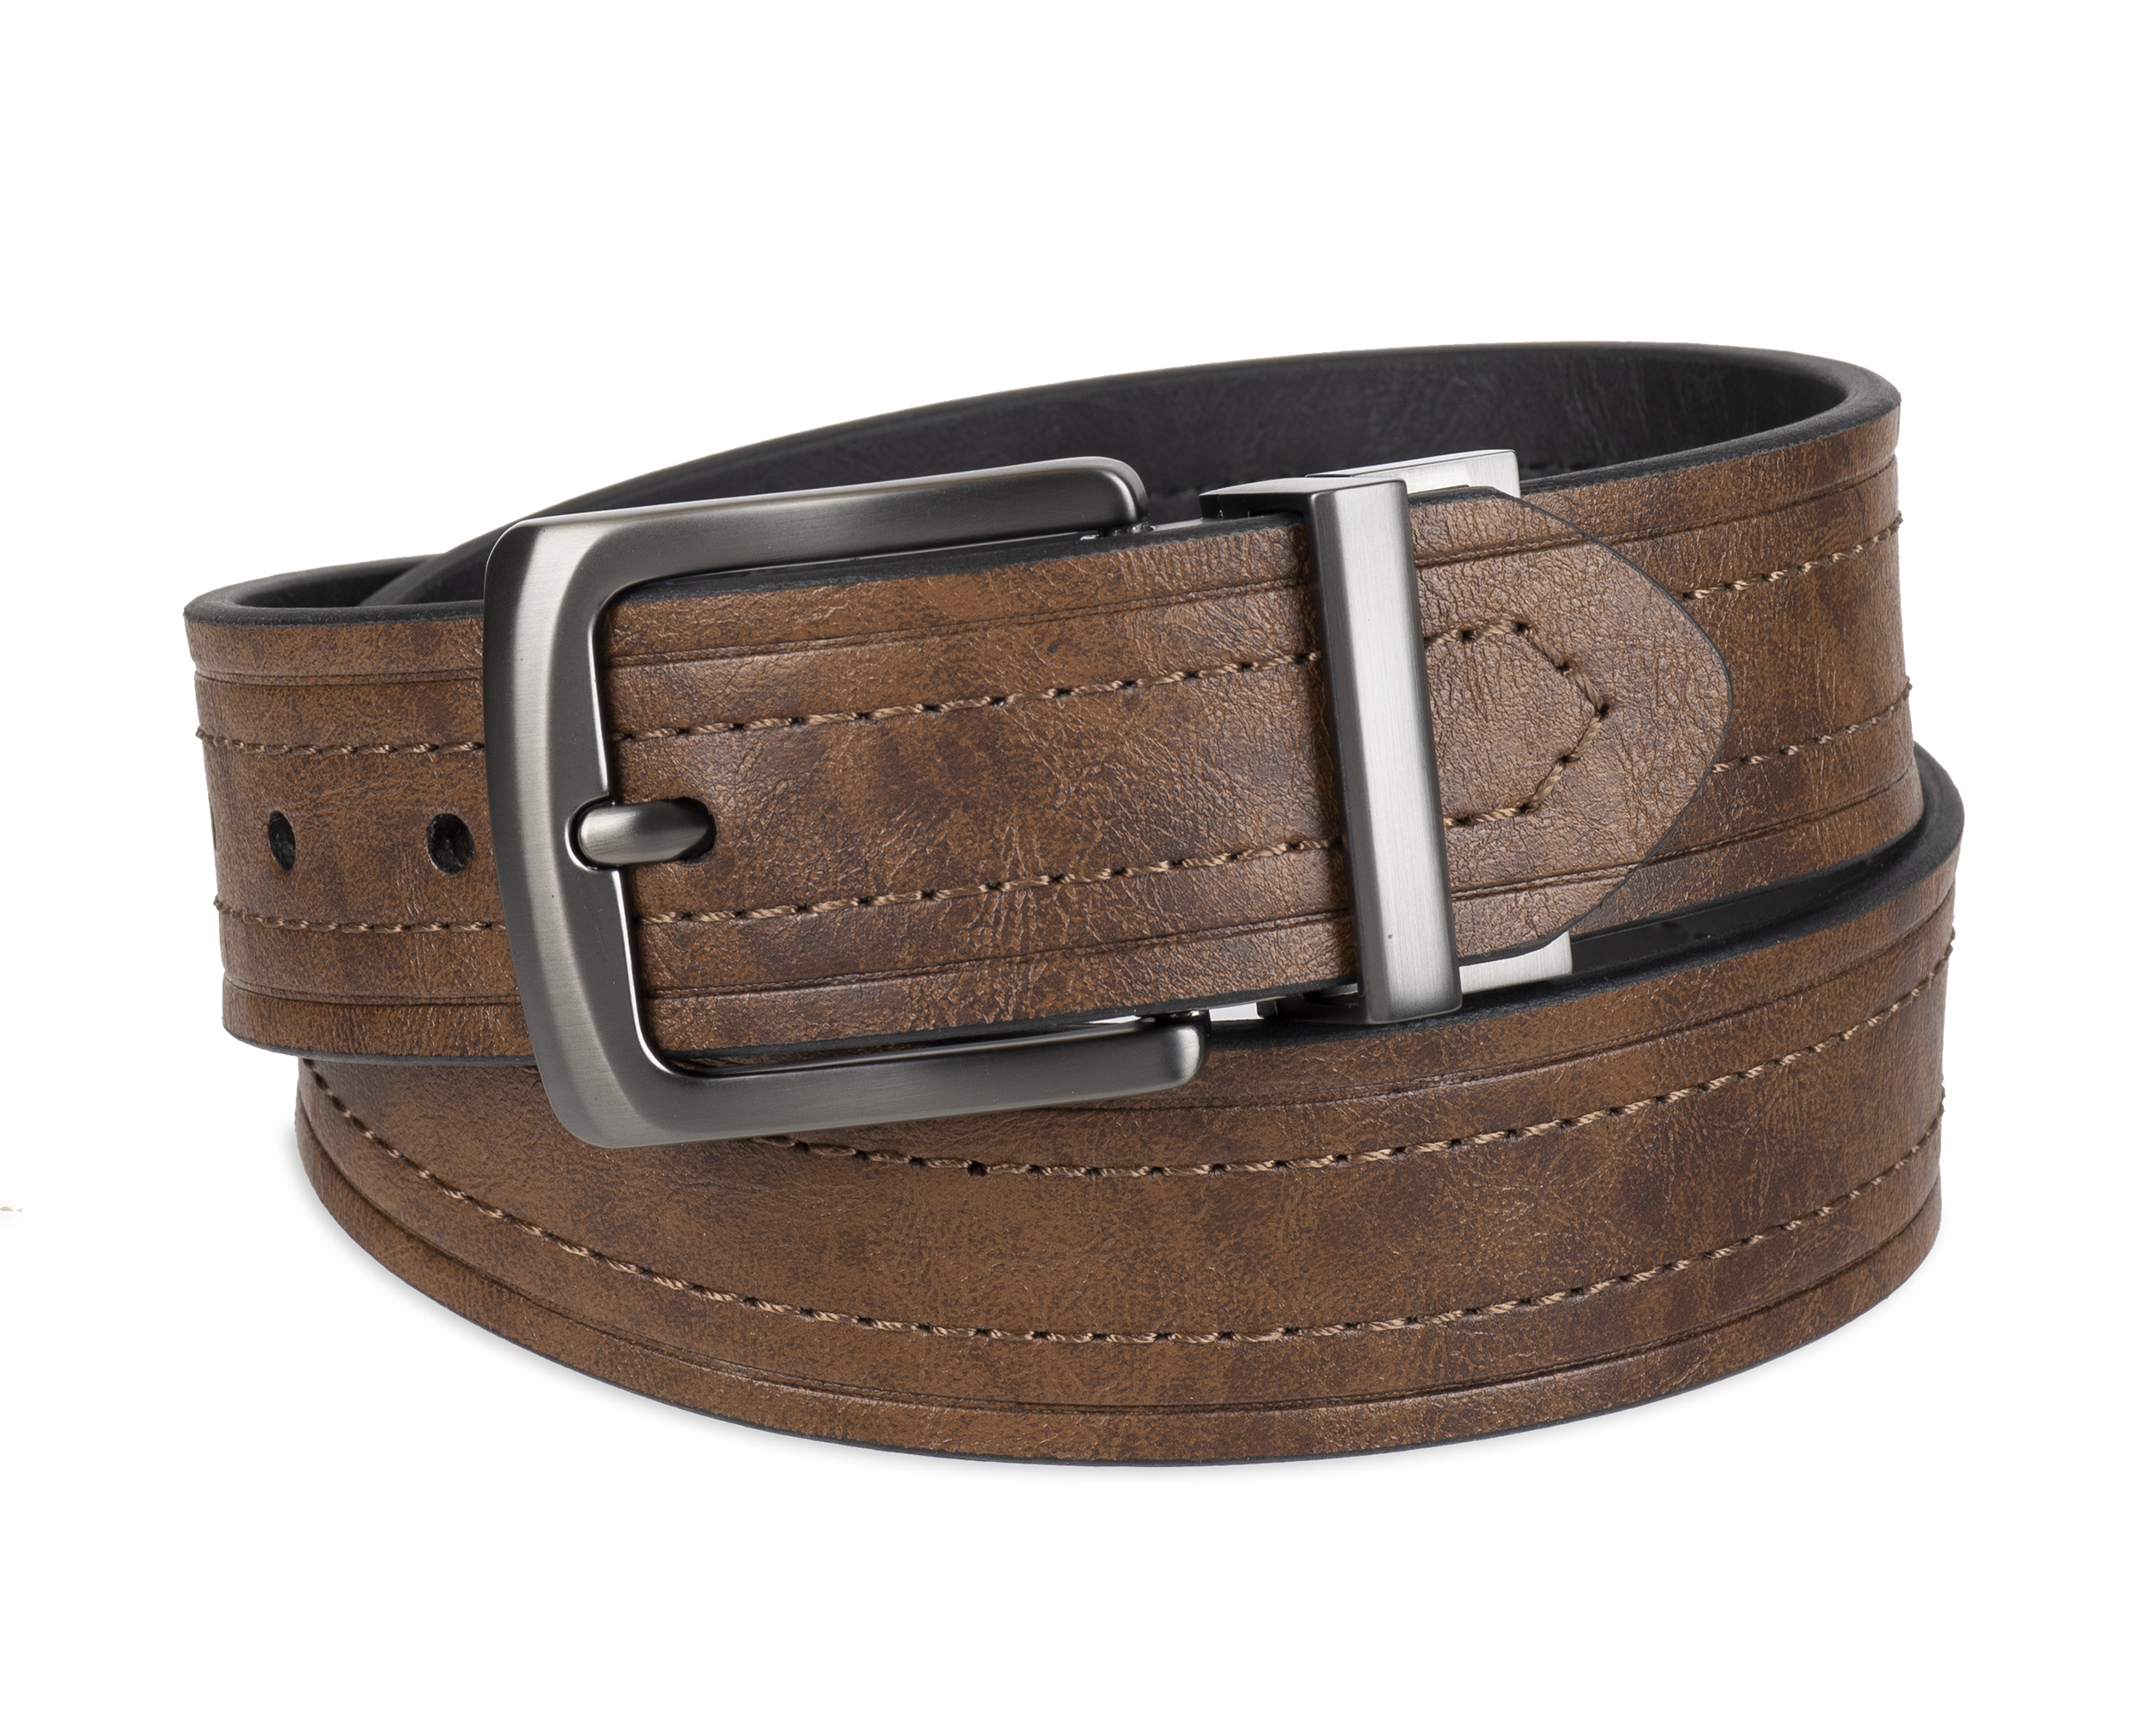 Levi's Men's Two-in-One Reversible Casual Belt, Brown/Black - image 2 of 8